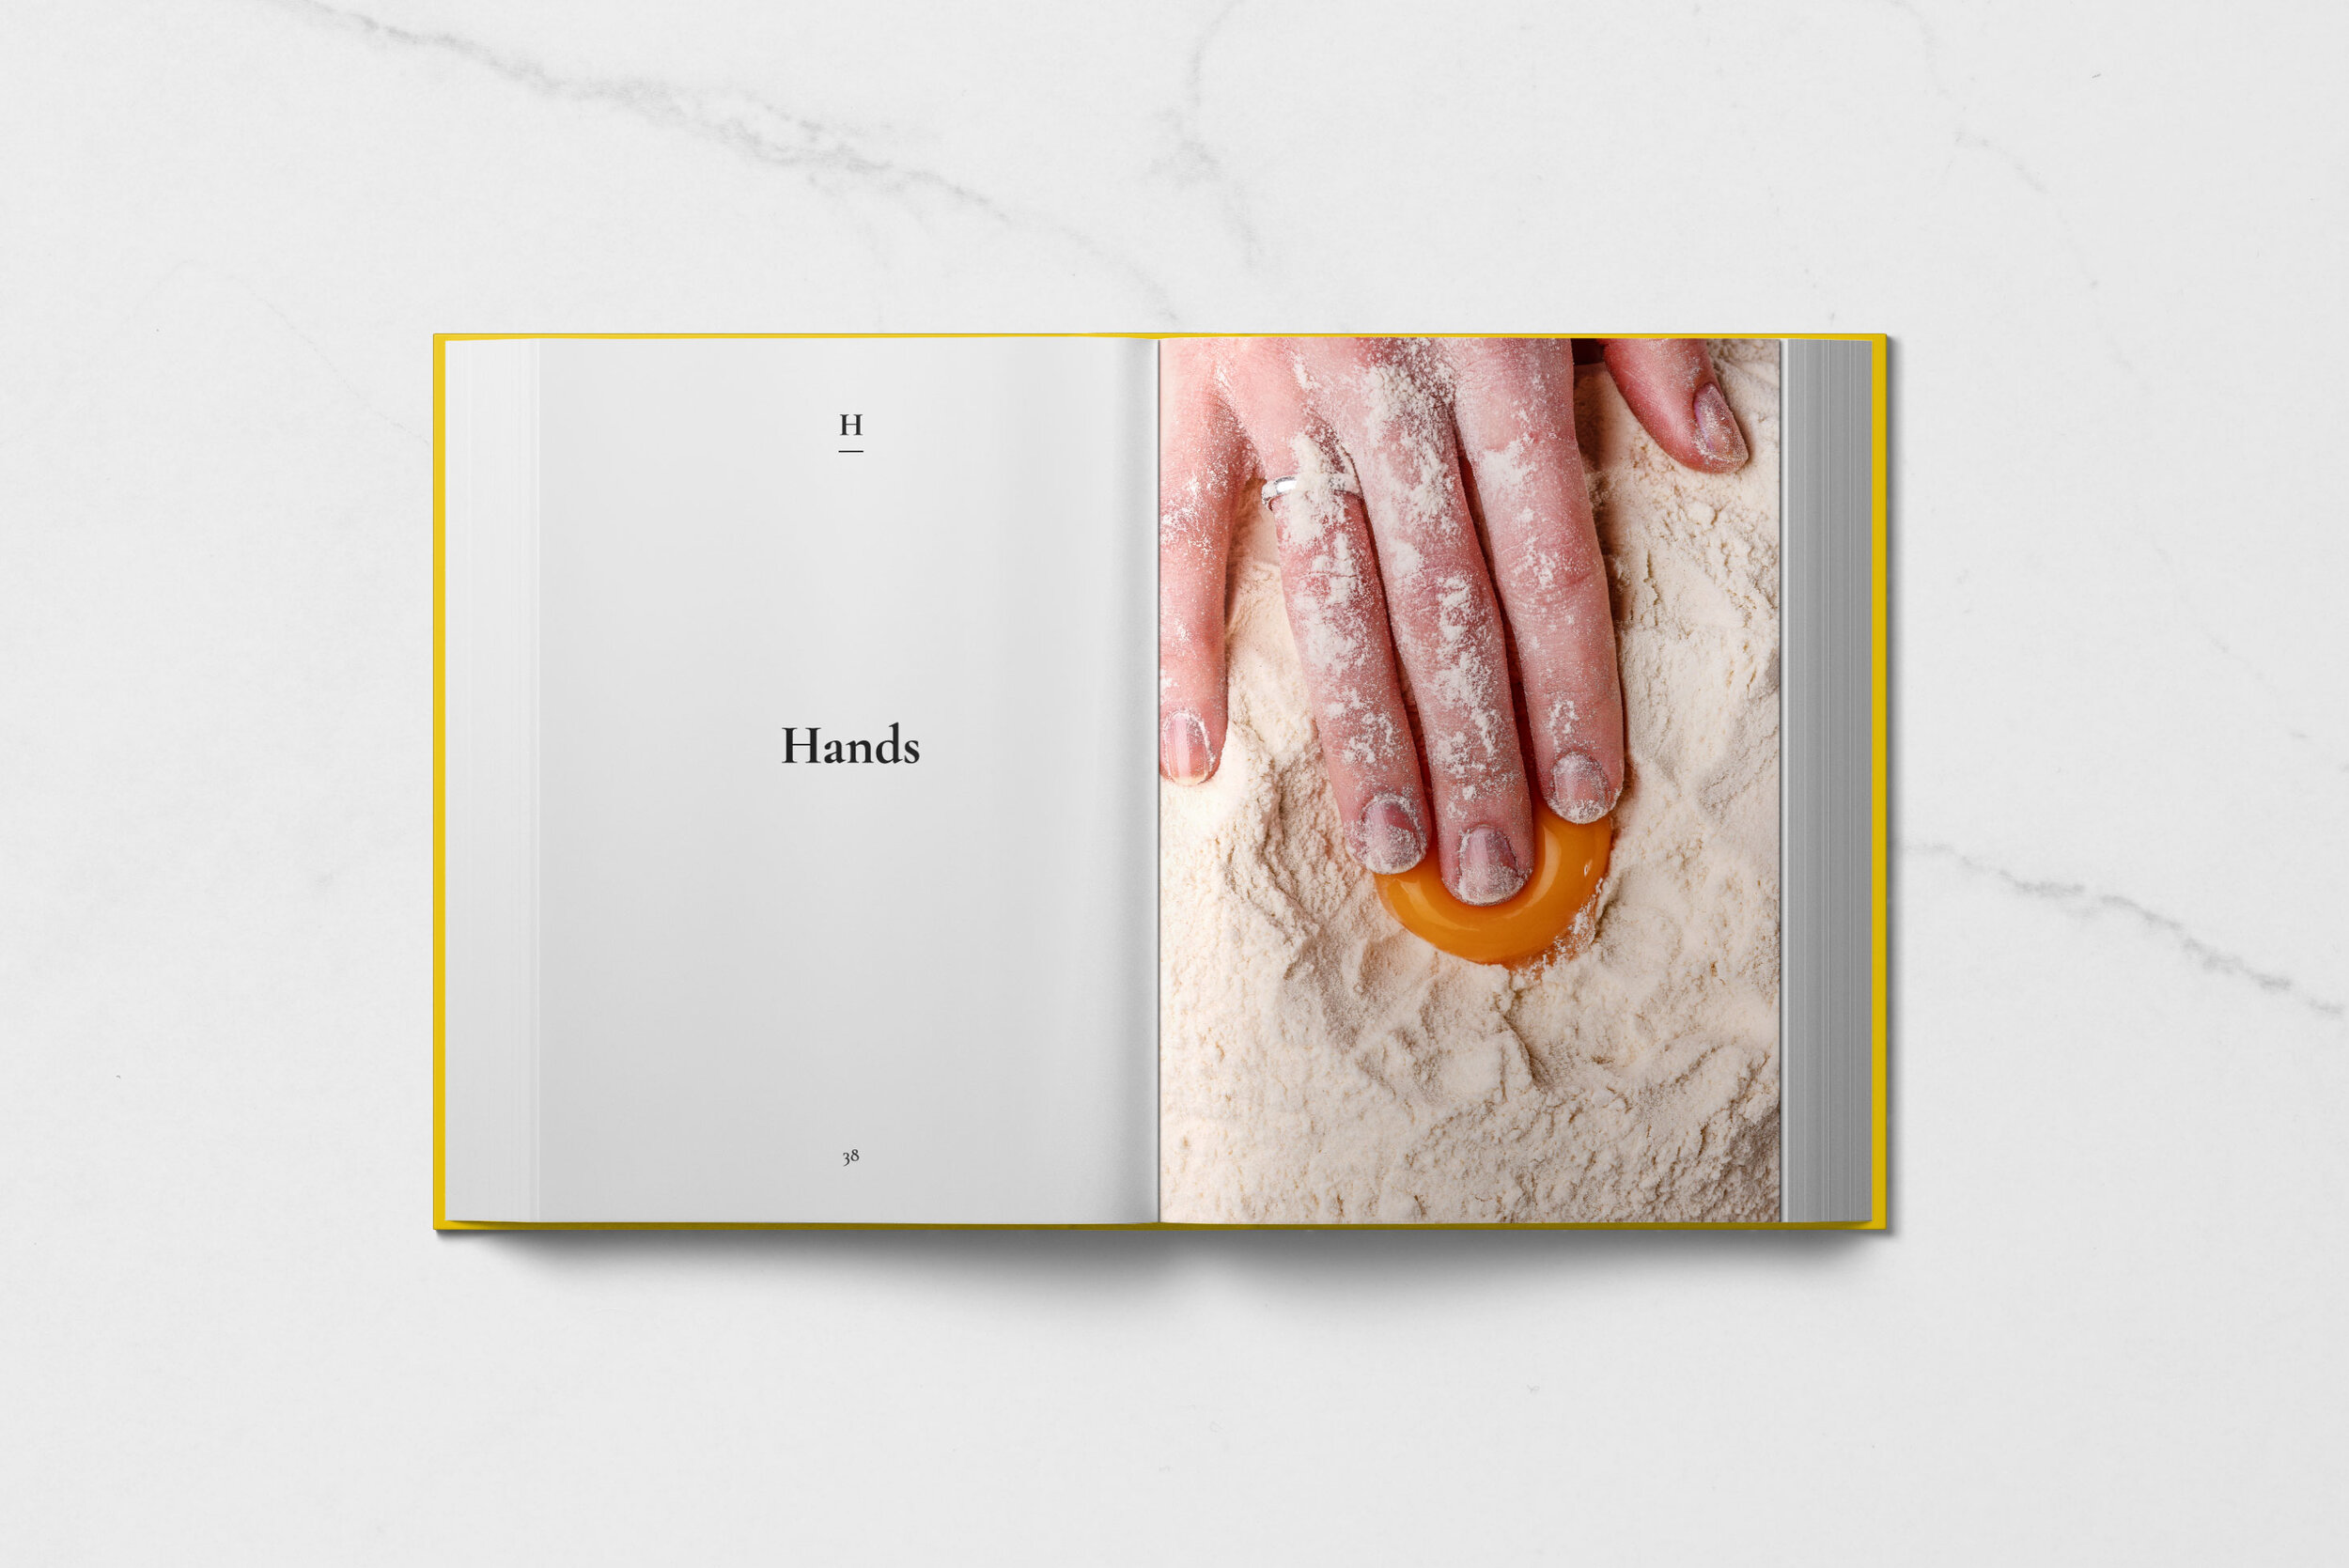 Lucy Ruth Hathaway The Food Styling Encyclopaedia, food photography art book, commercial food stylist, commercial food photography, food stylist tricks, food styling photography vocabulary, food artist, hand model